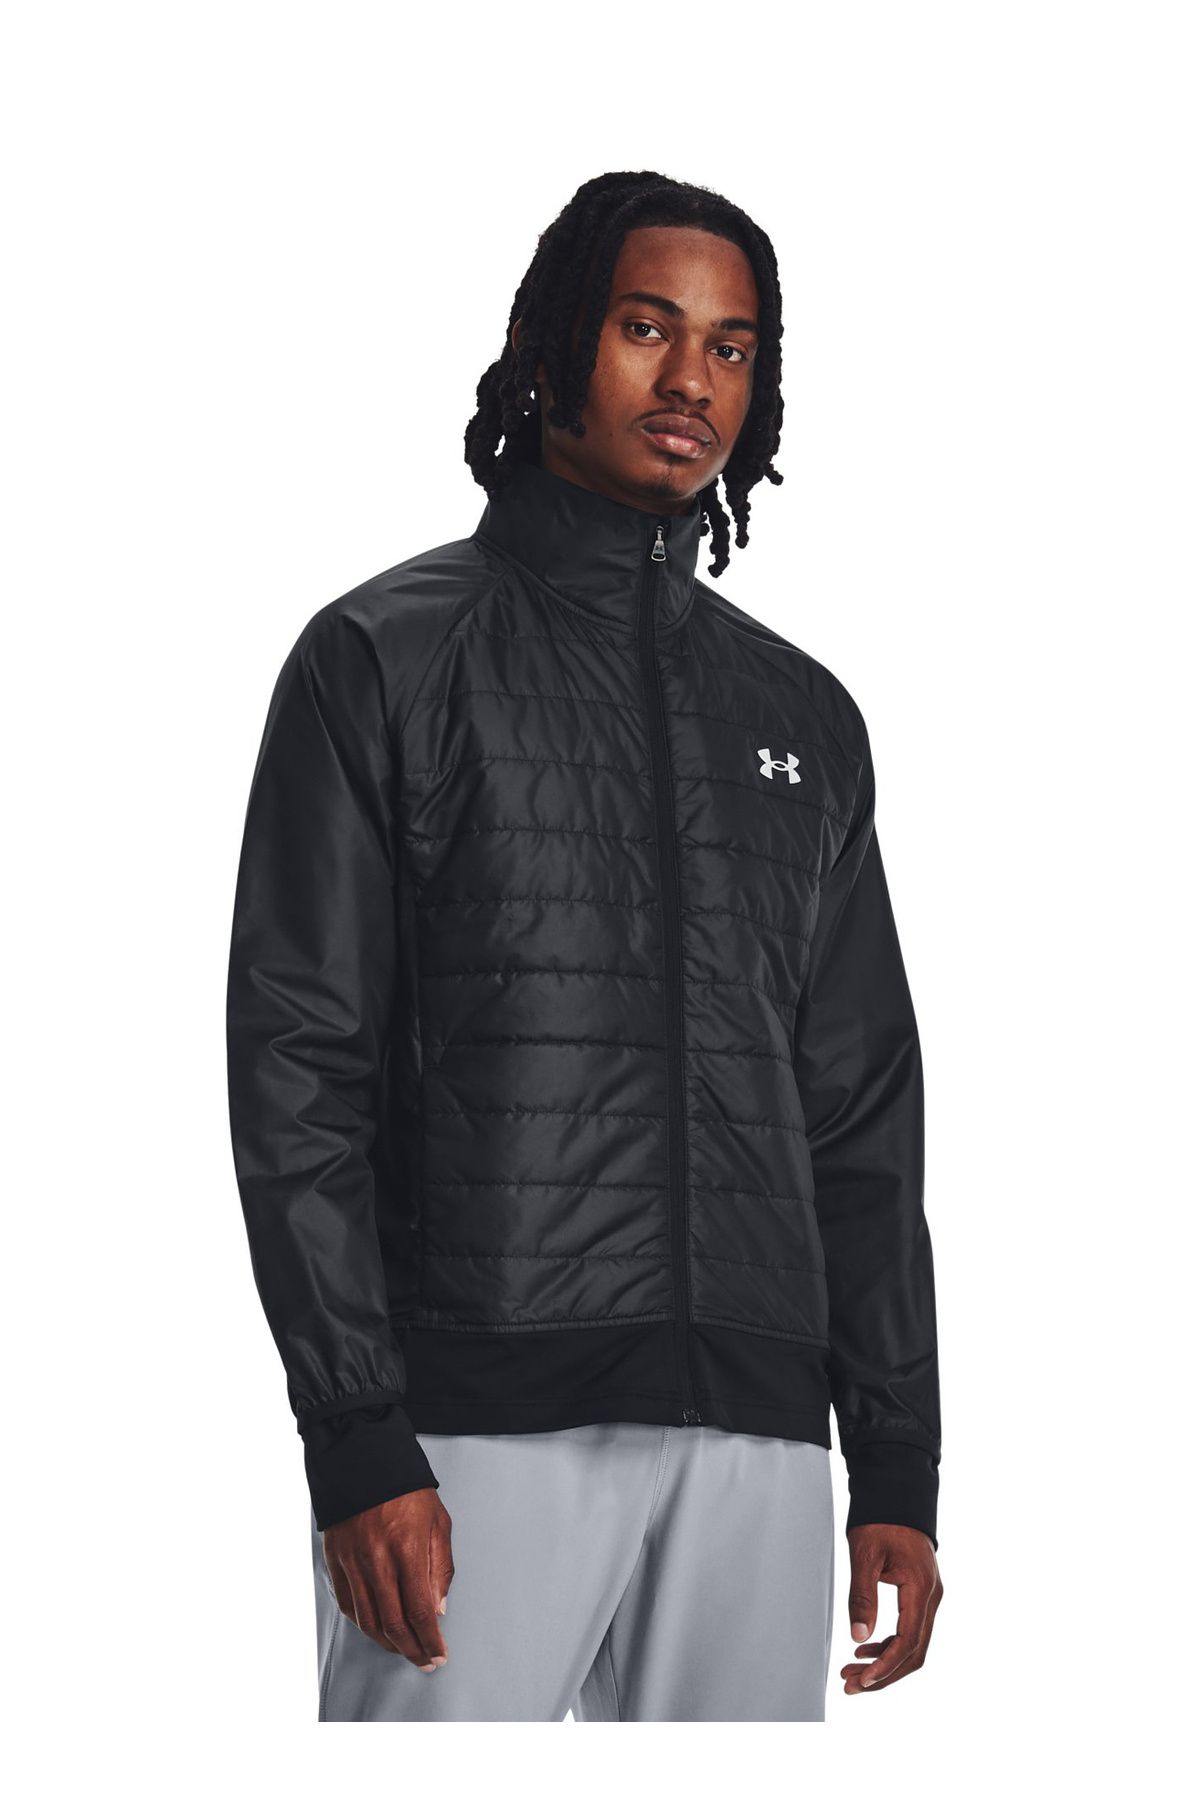 Under Armour Mont, S, Siyah